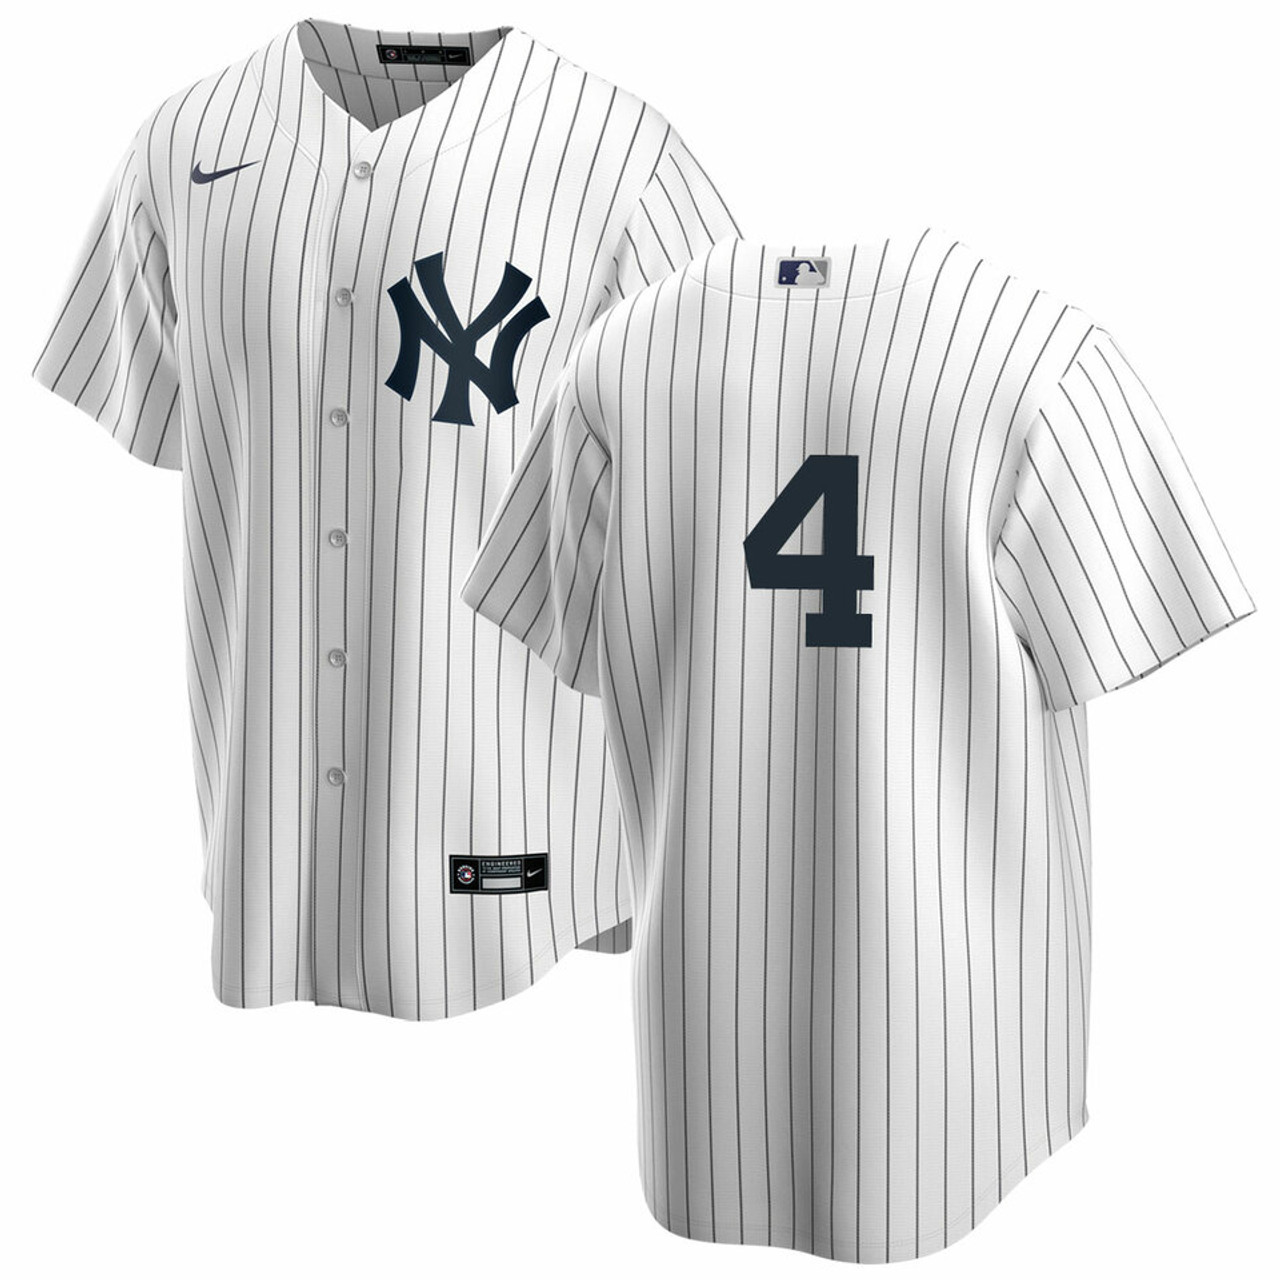 Lou Gehrig No Name Jersey - Yankees Replica Home Number Only Jersey